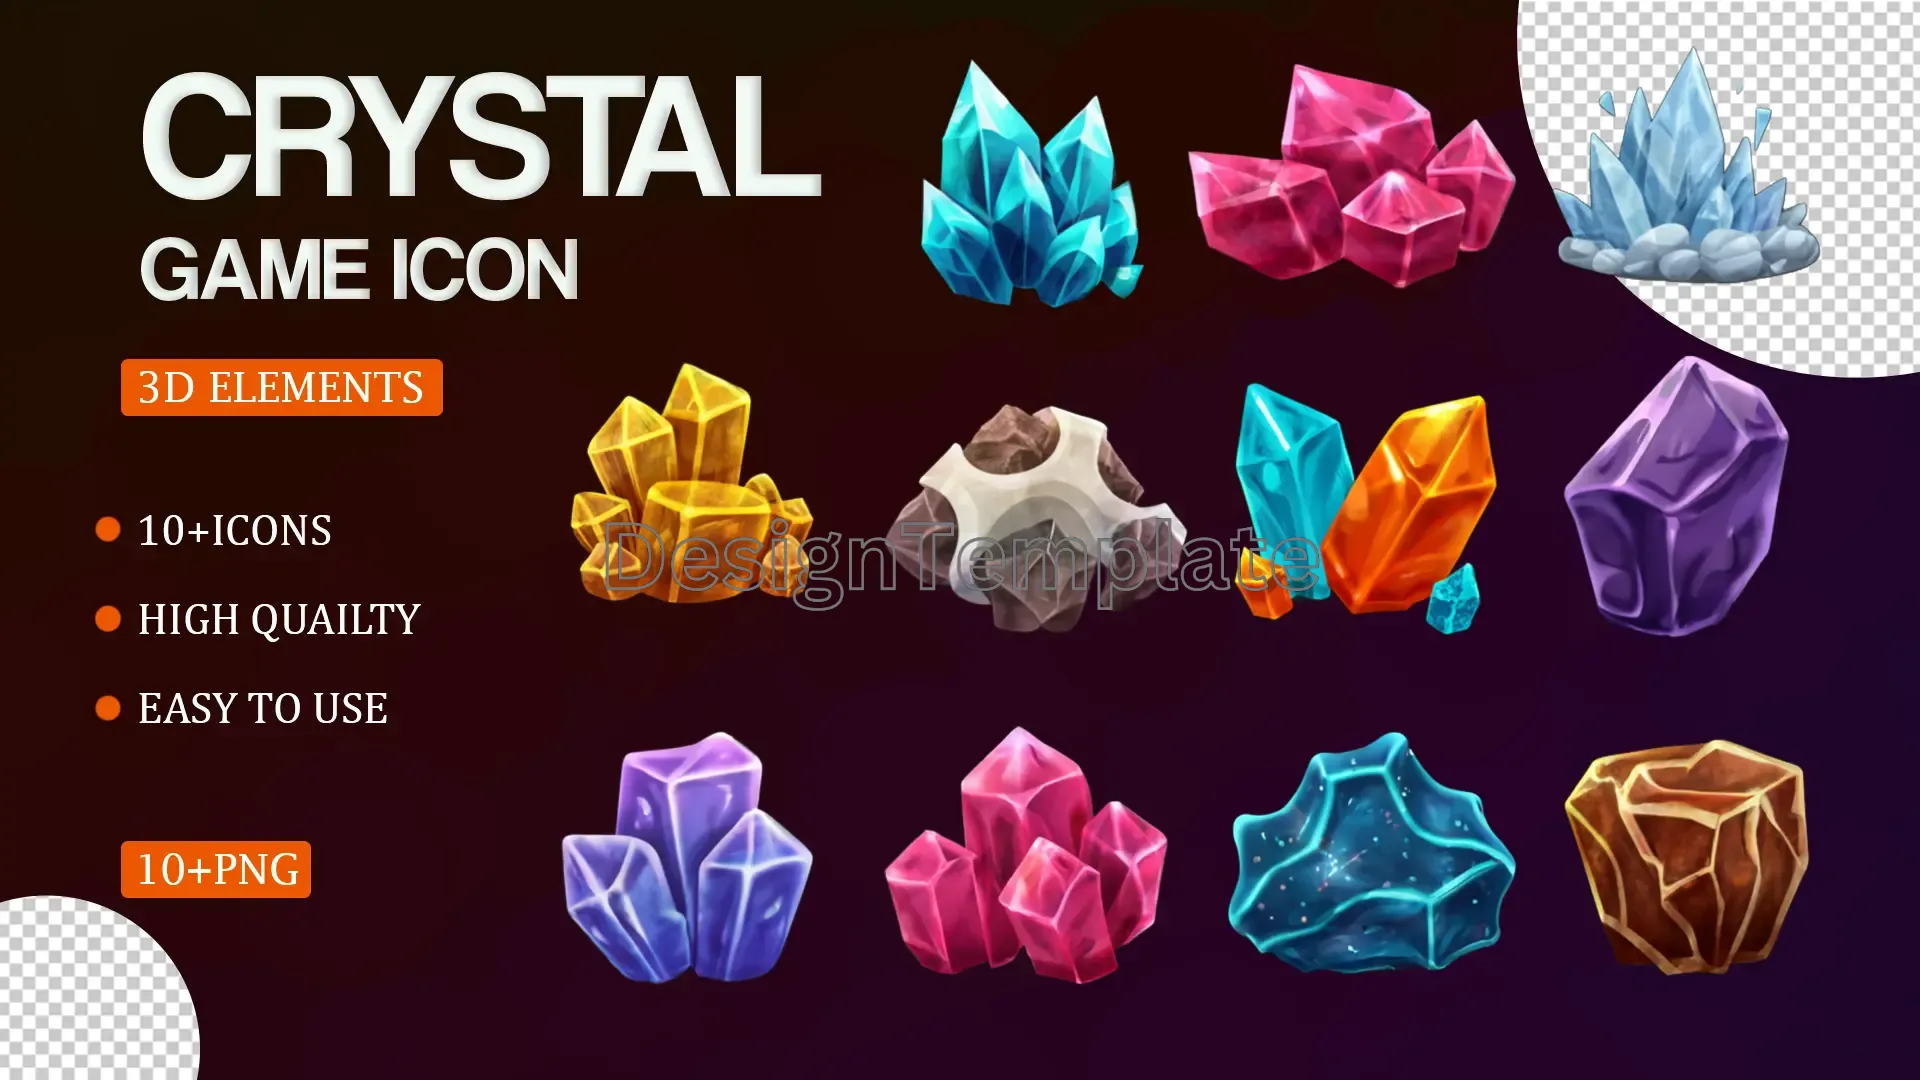 Fantasy Game Crystals A Luxurious 3D Elements Pack image